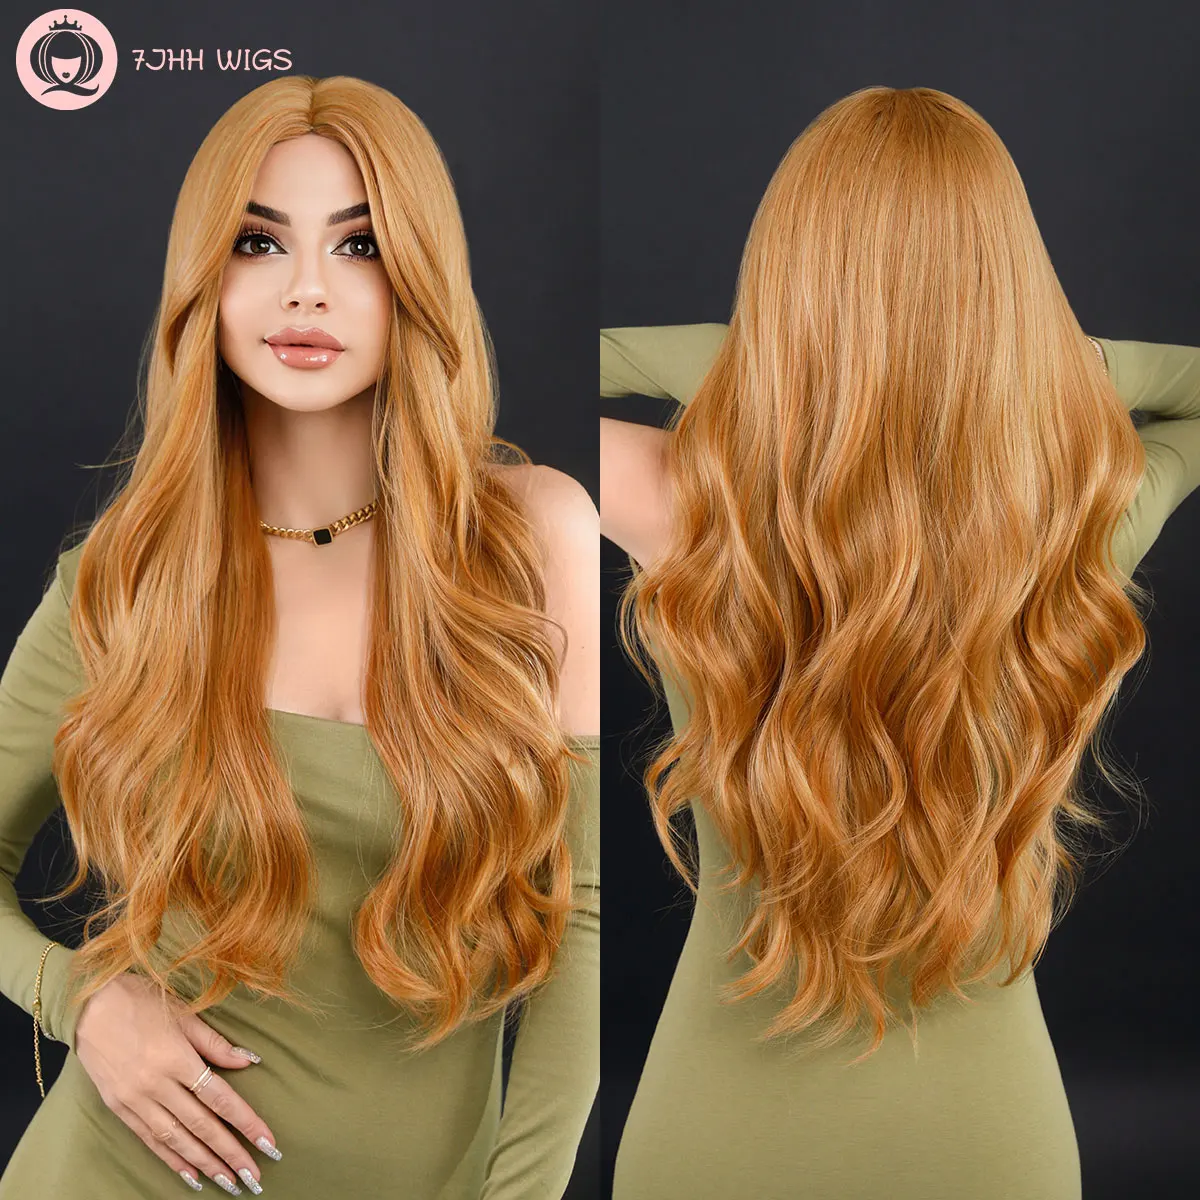 7JHH WIGS Light Blonde Wig for Women Daily Cosplay Natural Middle Part Wavy Synthetic Hair Lolita Wig Disguise Heat Resistant